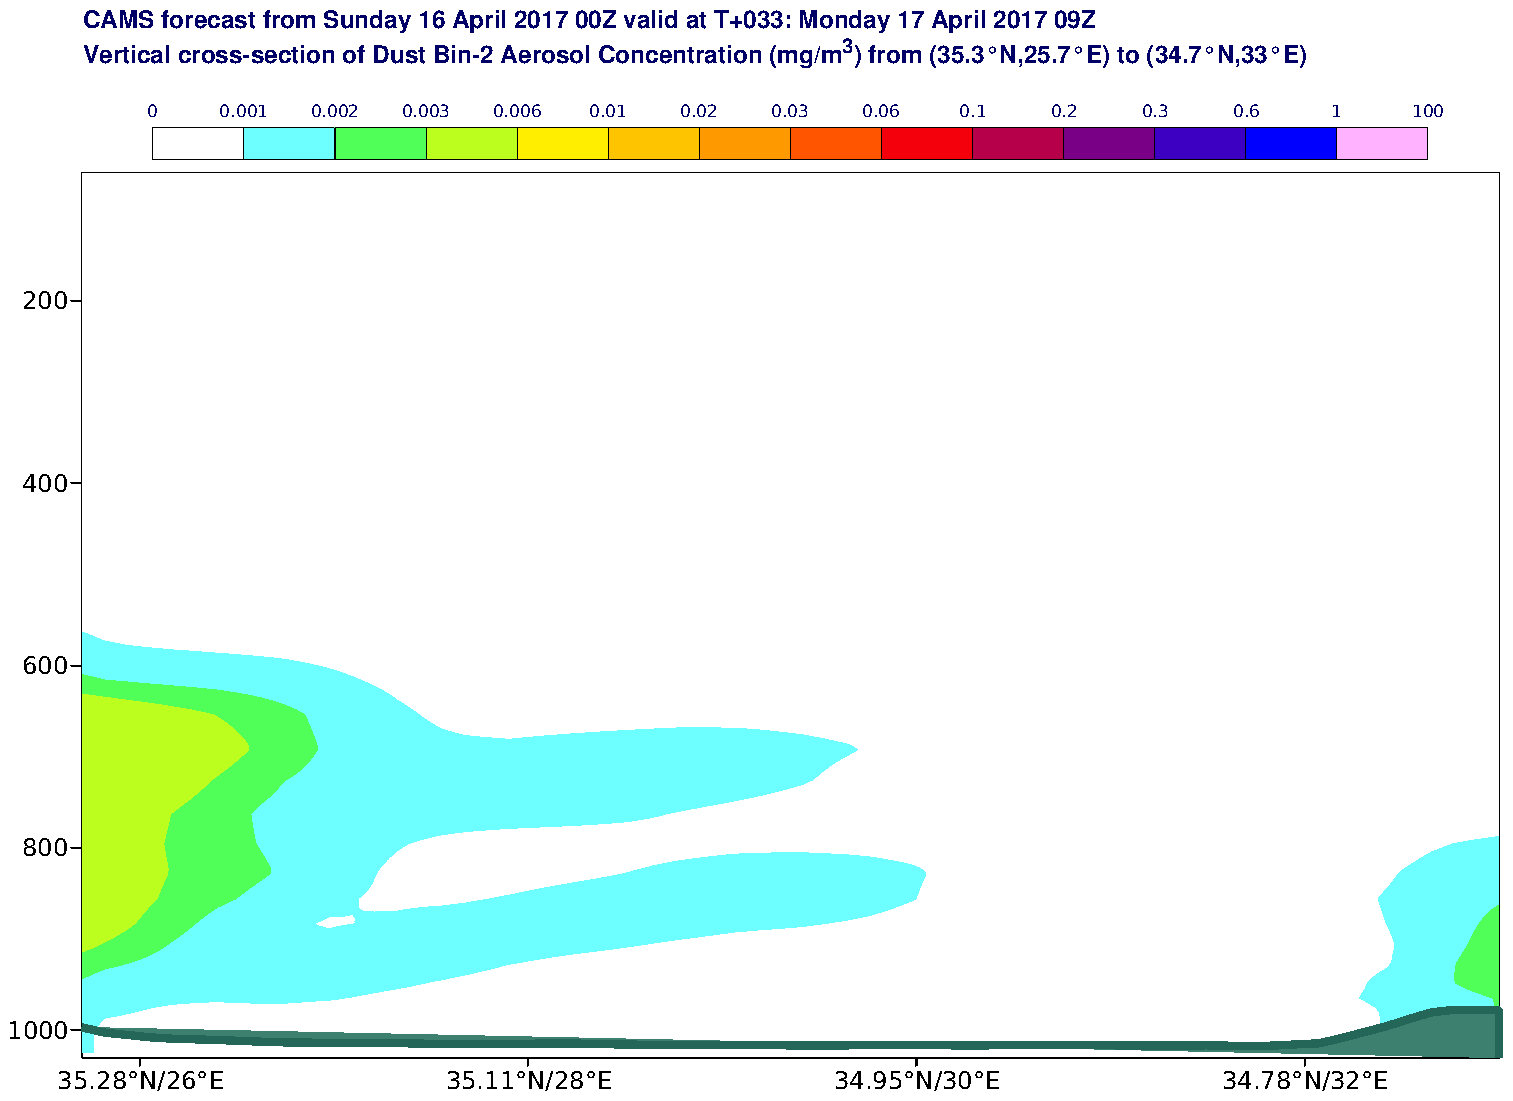 Vertical cross-section of Dust Bin-2 Aerosol Concentration (mg/m3) valid at T33 - 2017-04-17 09:00